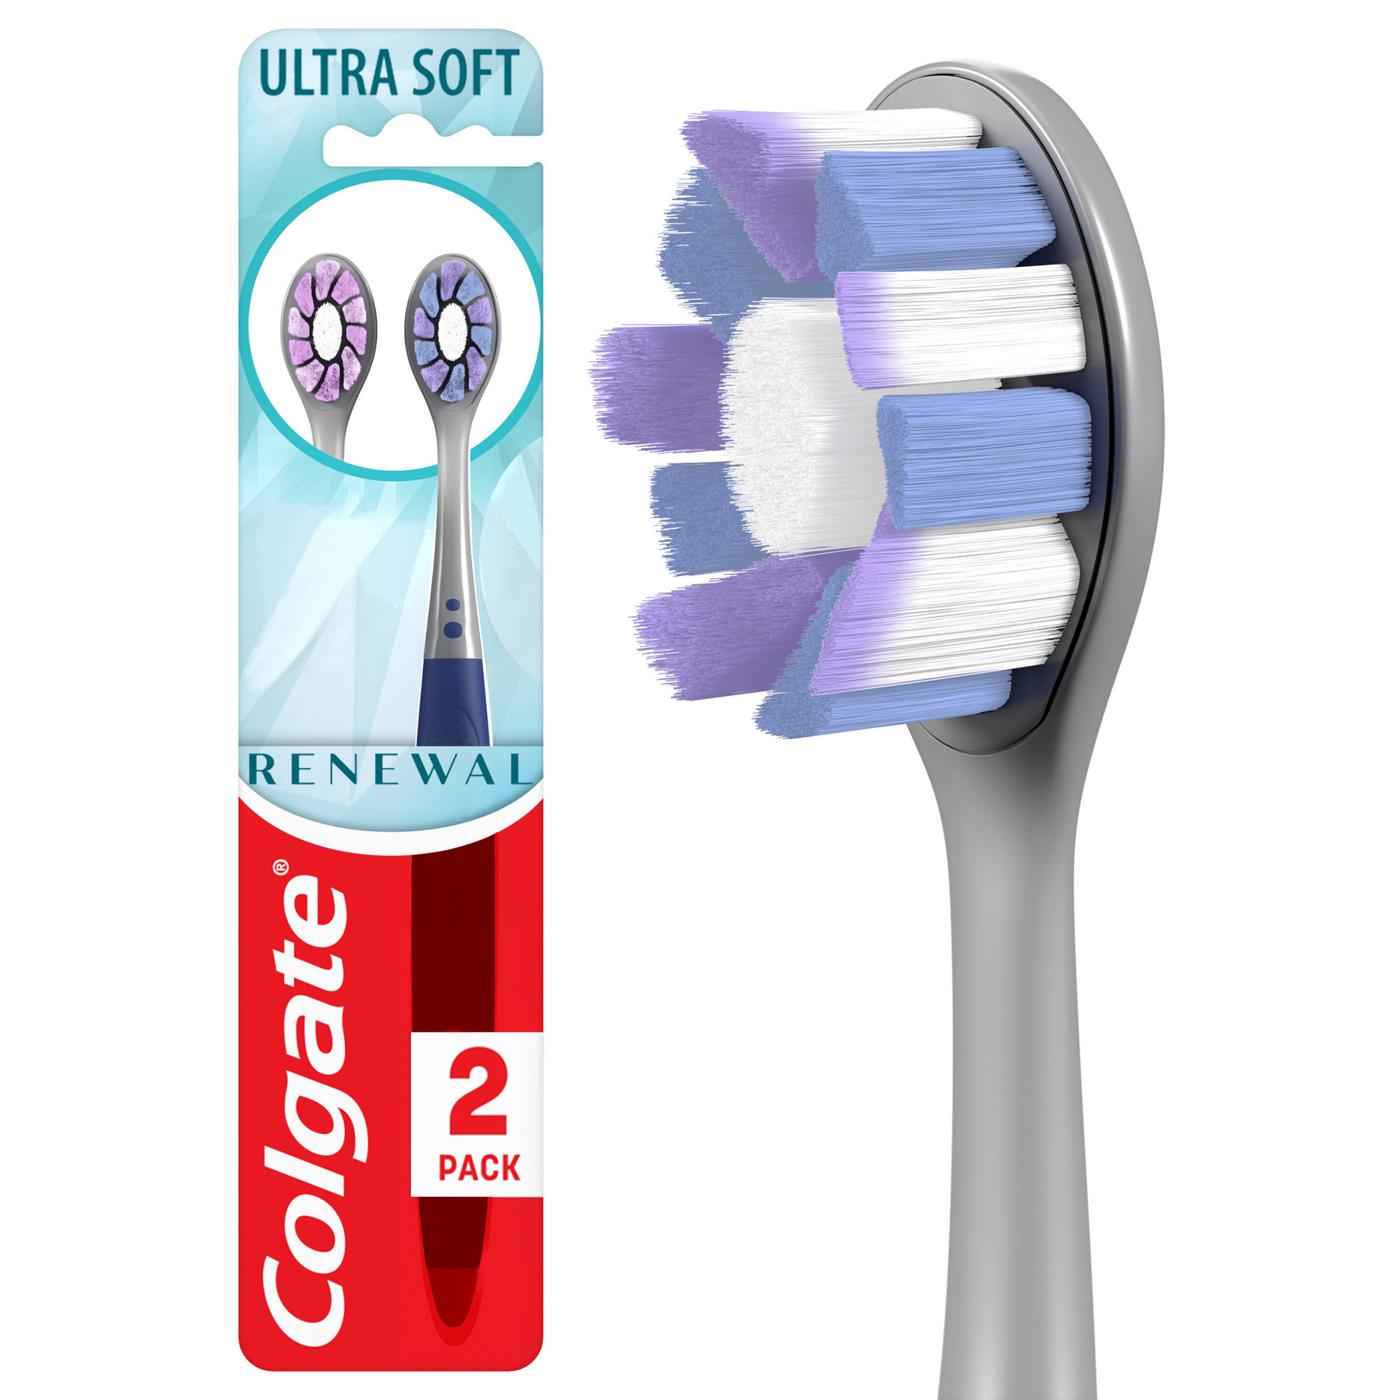 Colgate Renewal Ultra Soft Toothbrushes; image 3 of 3